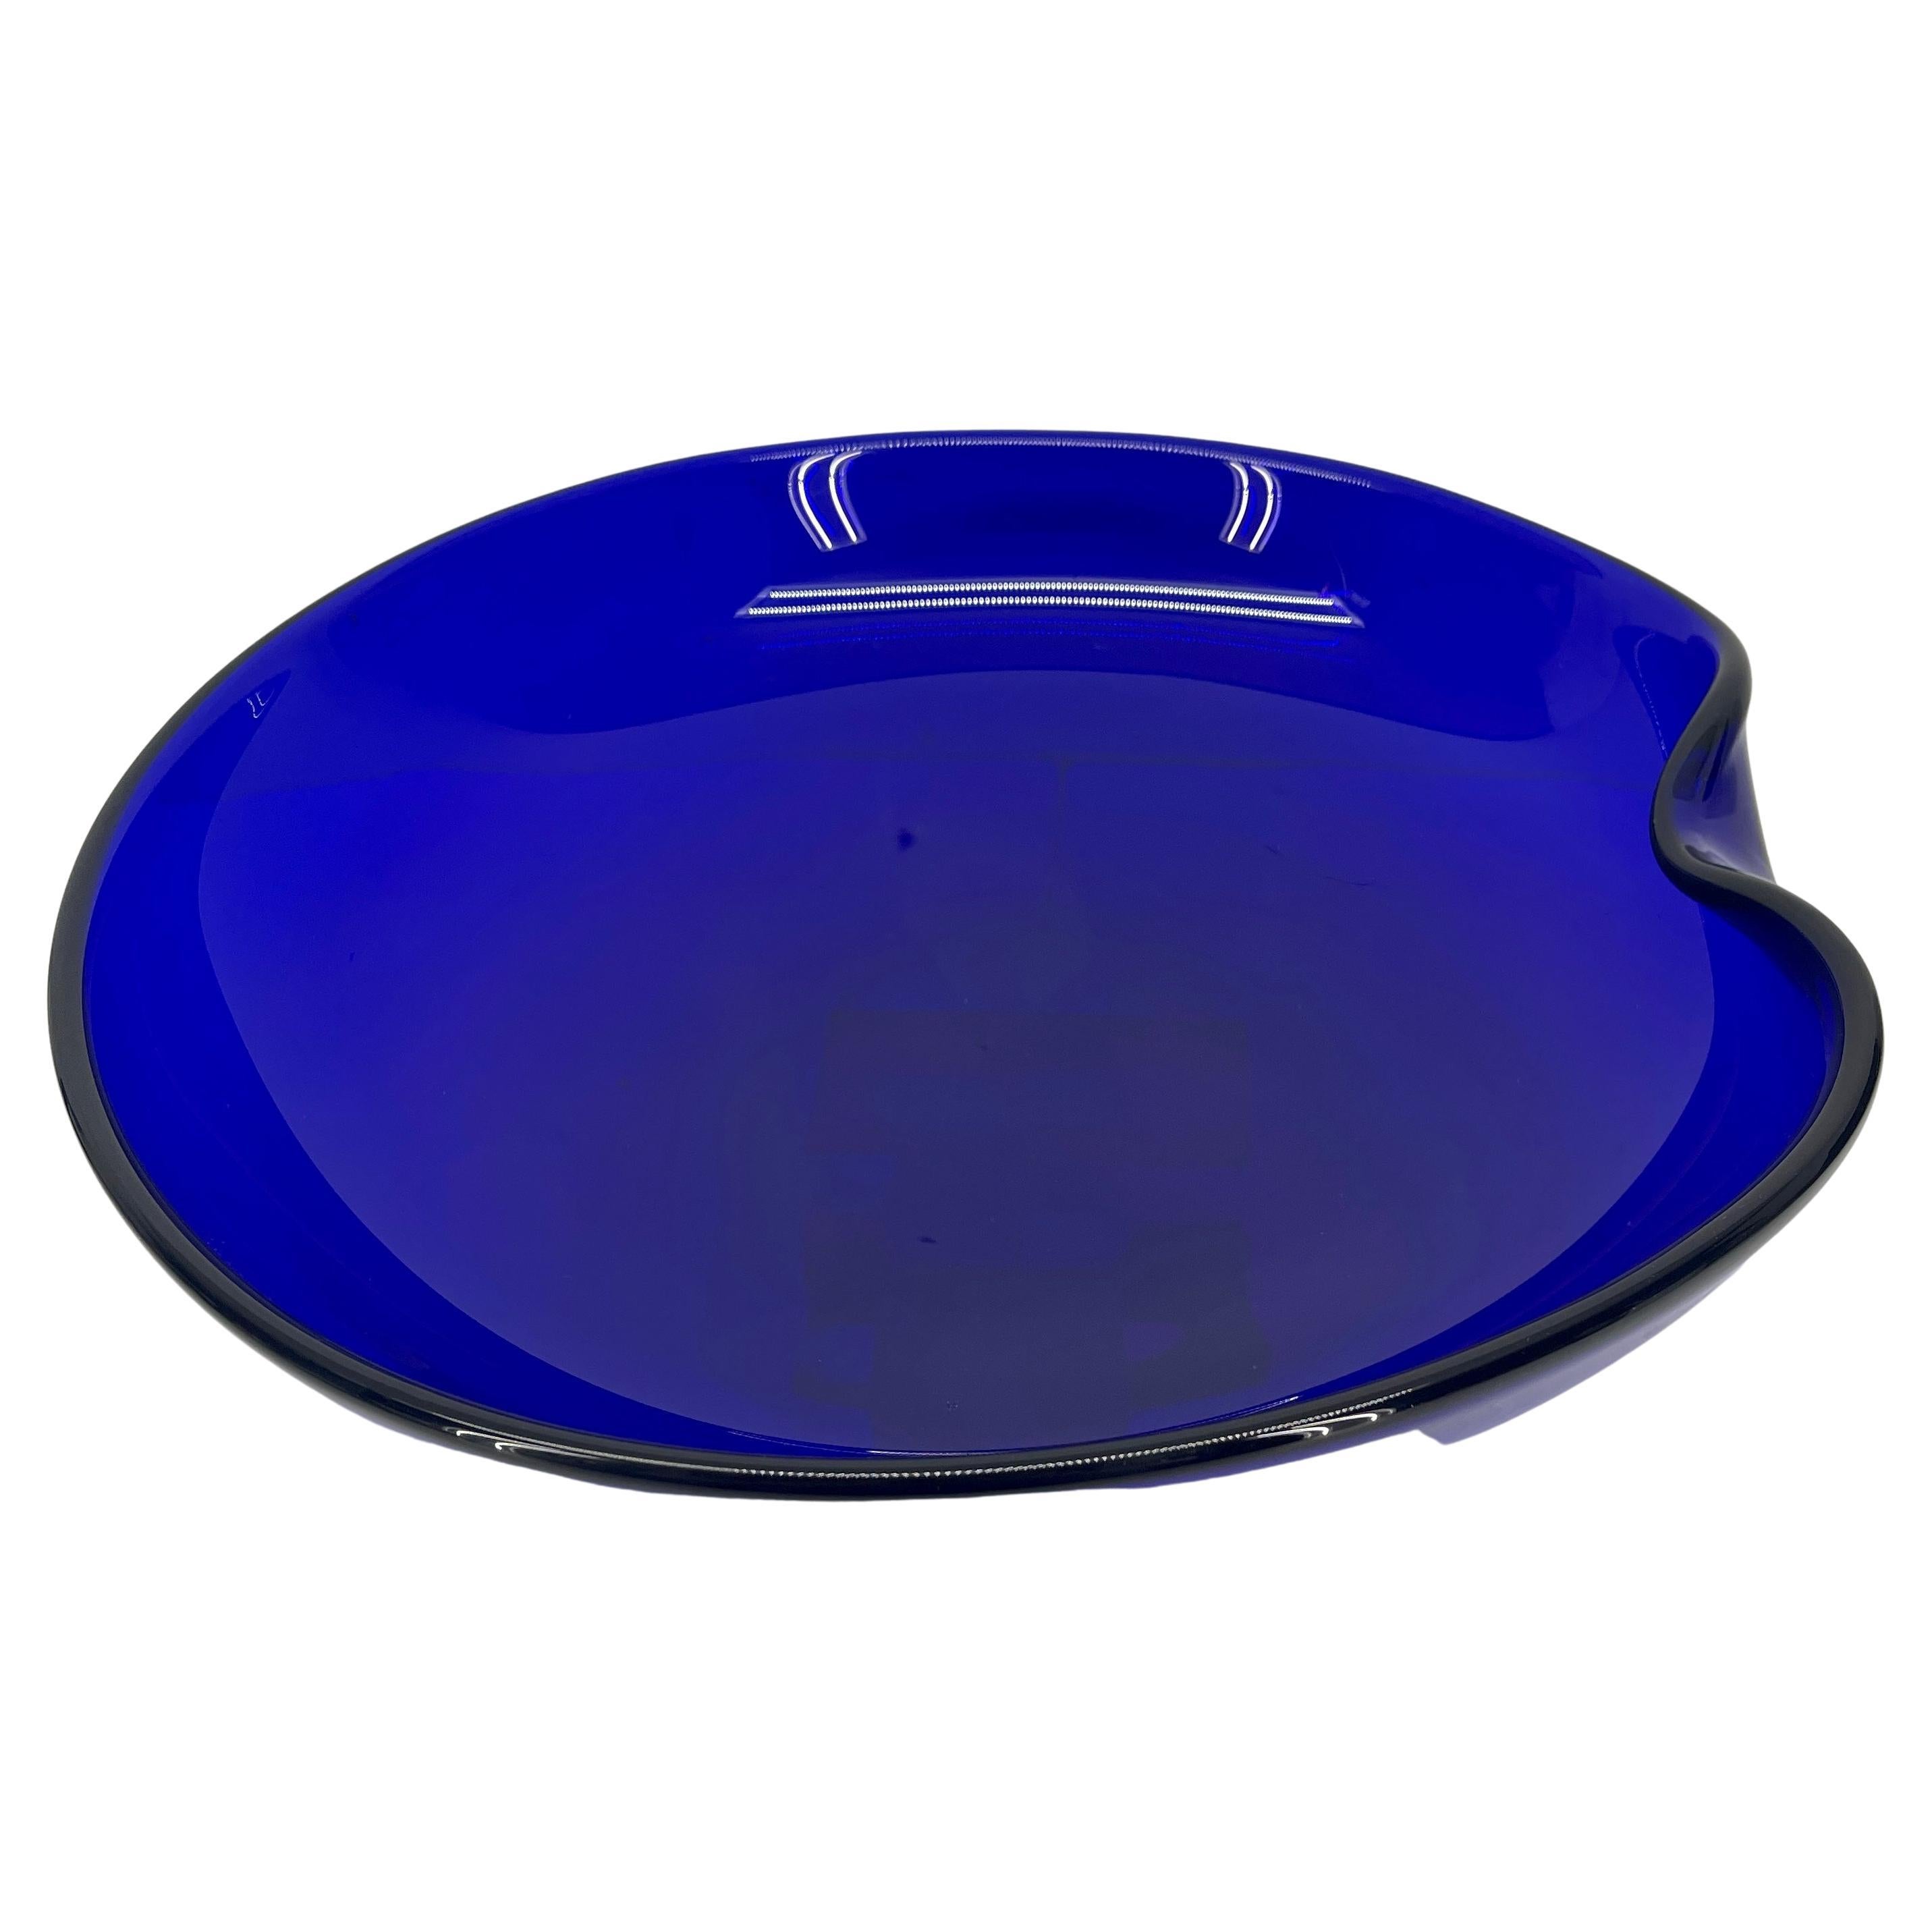 Large Italian vintage cobalt blue thumbprint glass bowl, designed and signed by Elsa Peretti For Tiffany.